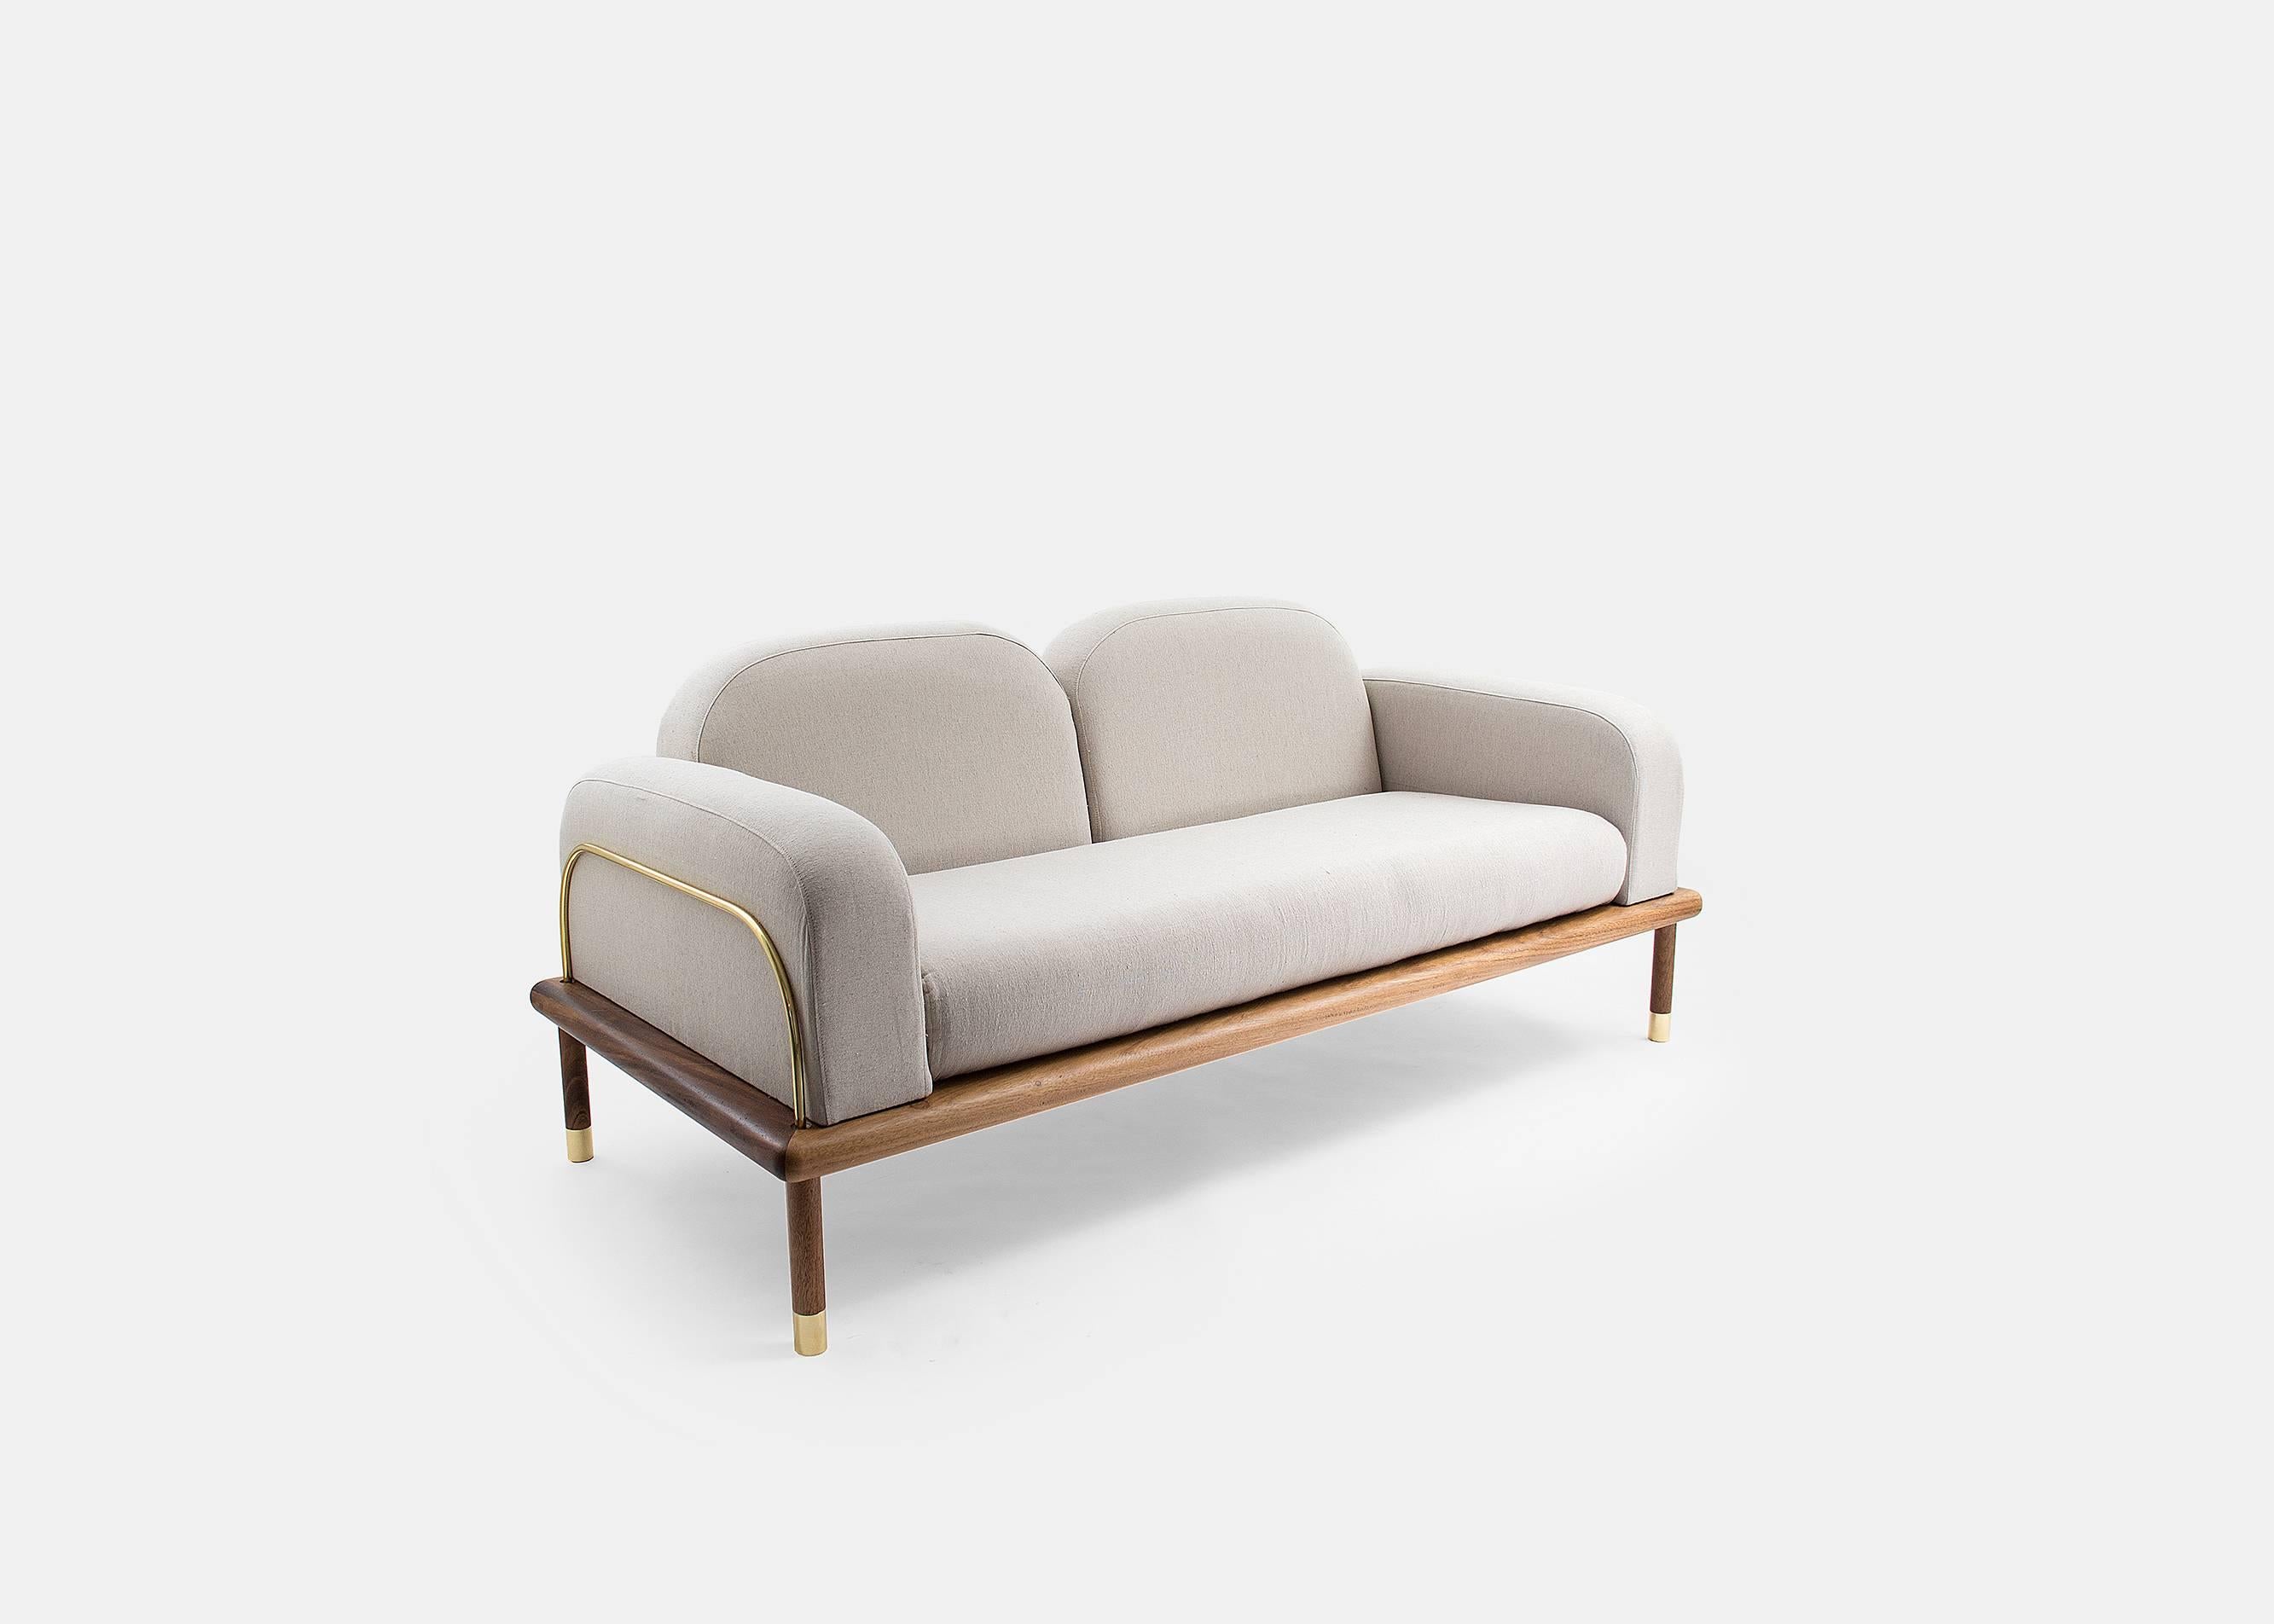 Prado/Sofa in Parota Wood and Details in Cooper or Brass For Sale 1